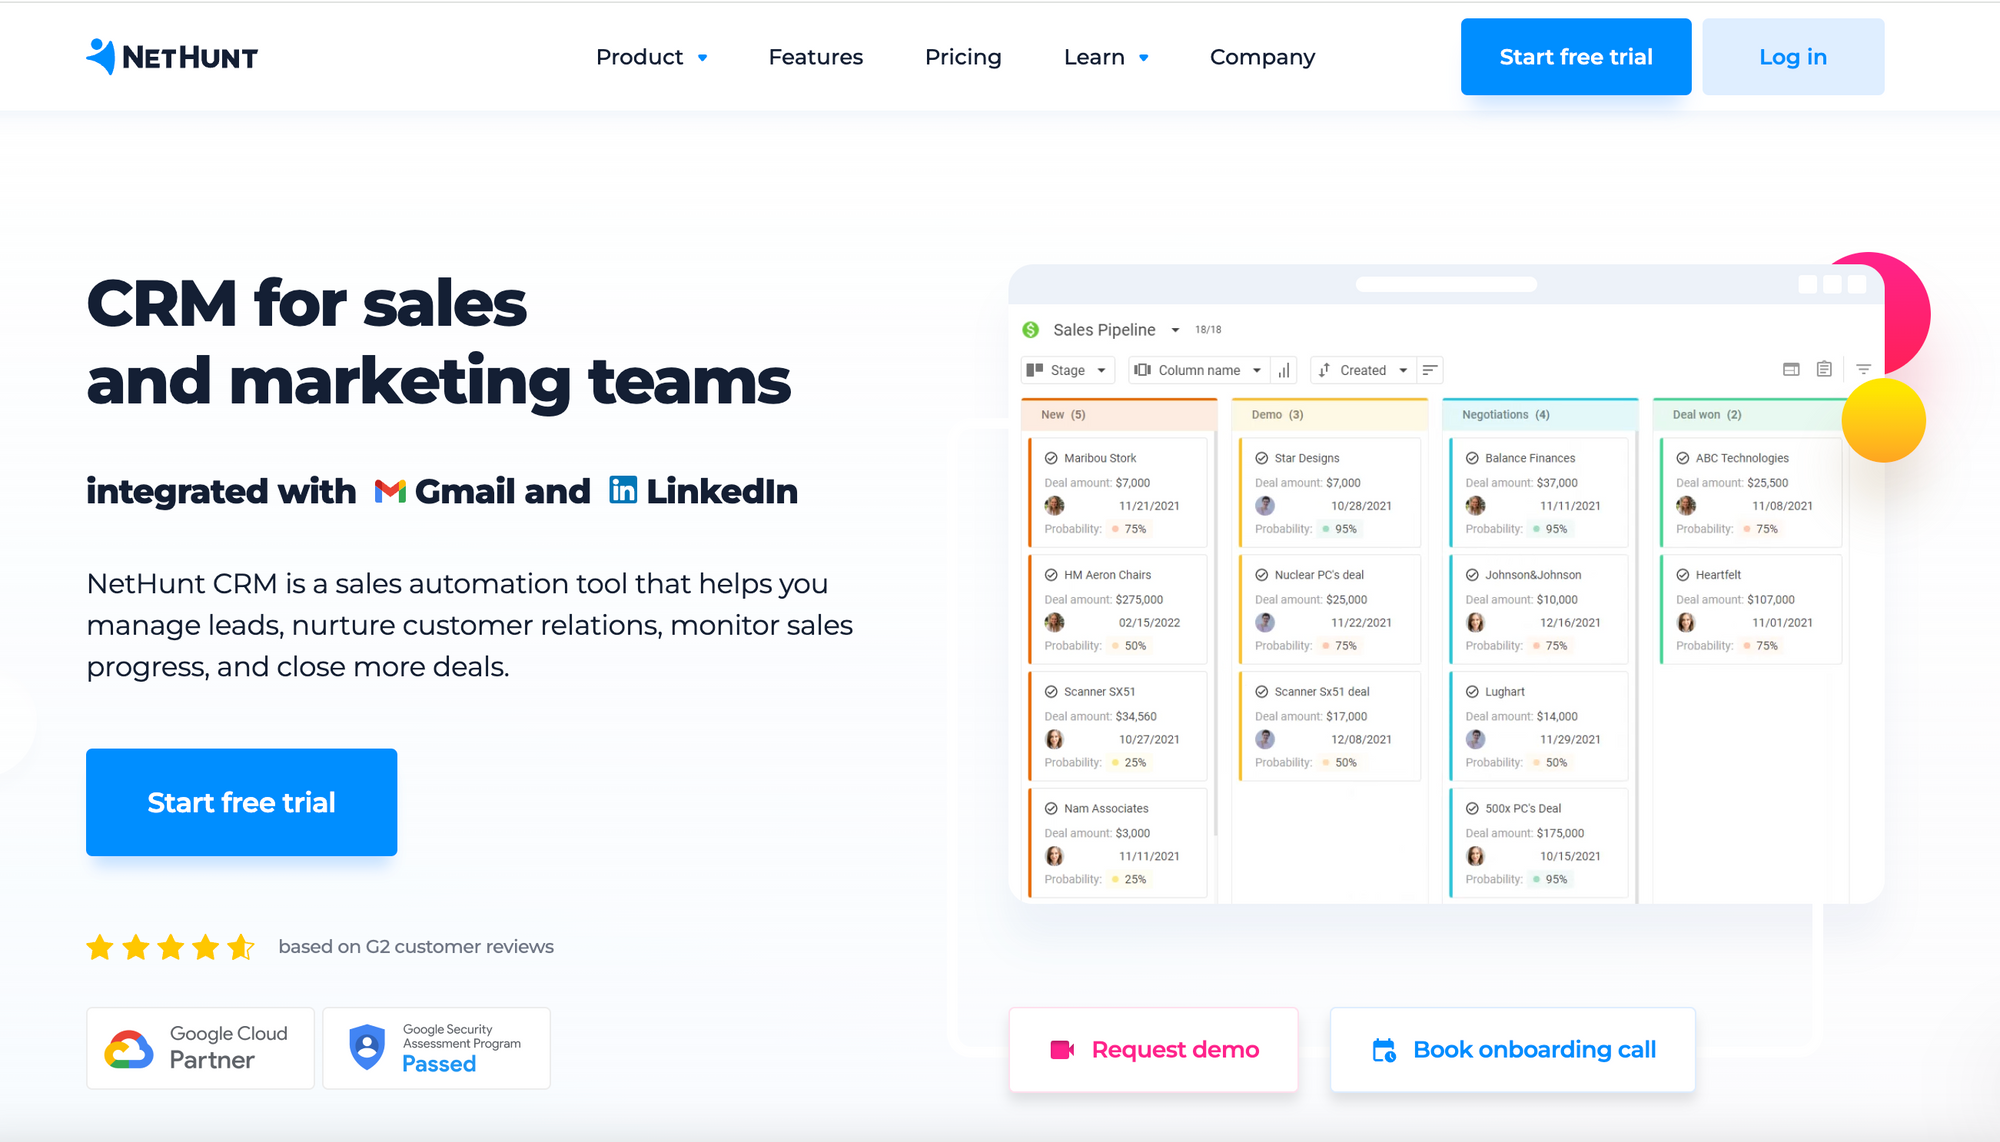 NetHunt CRM for sales